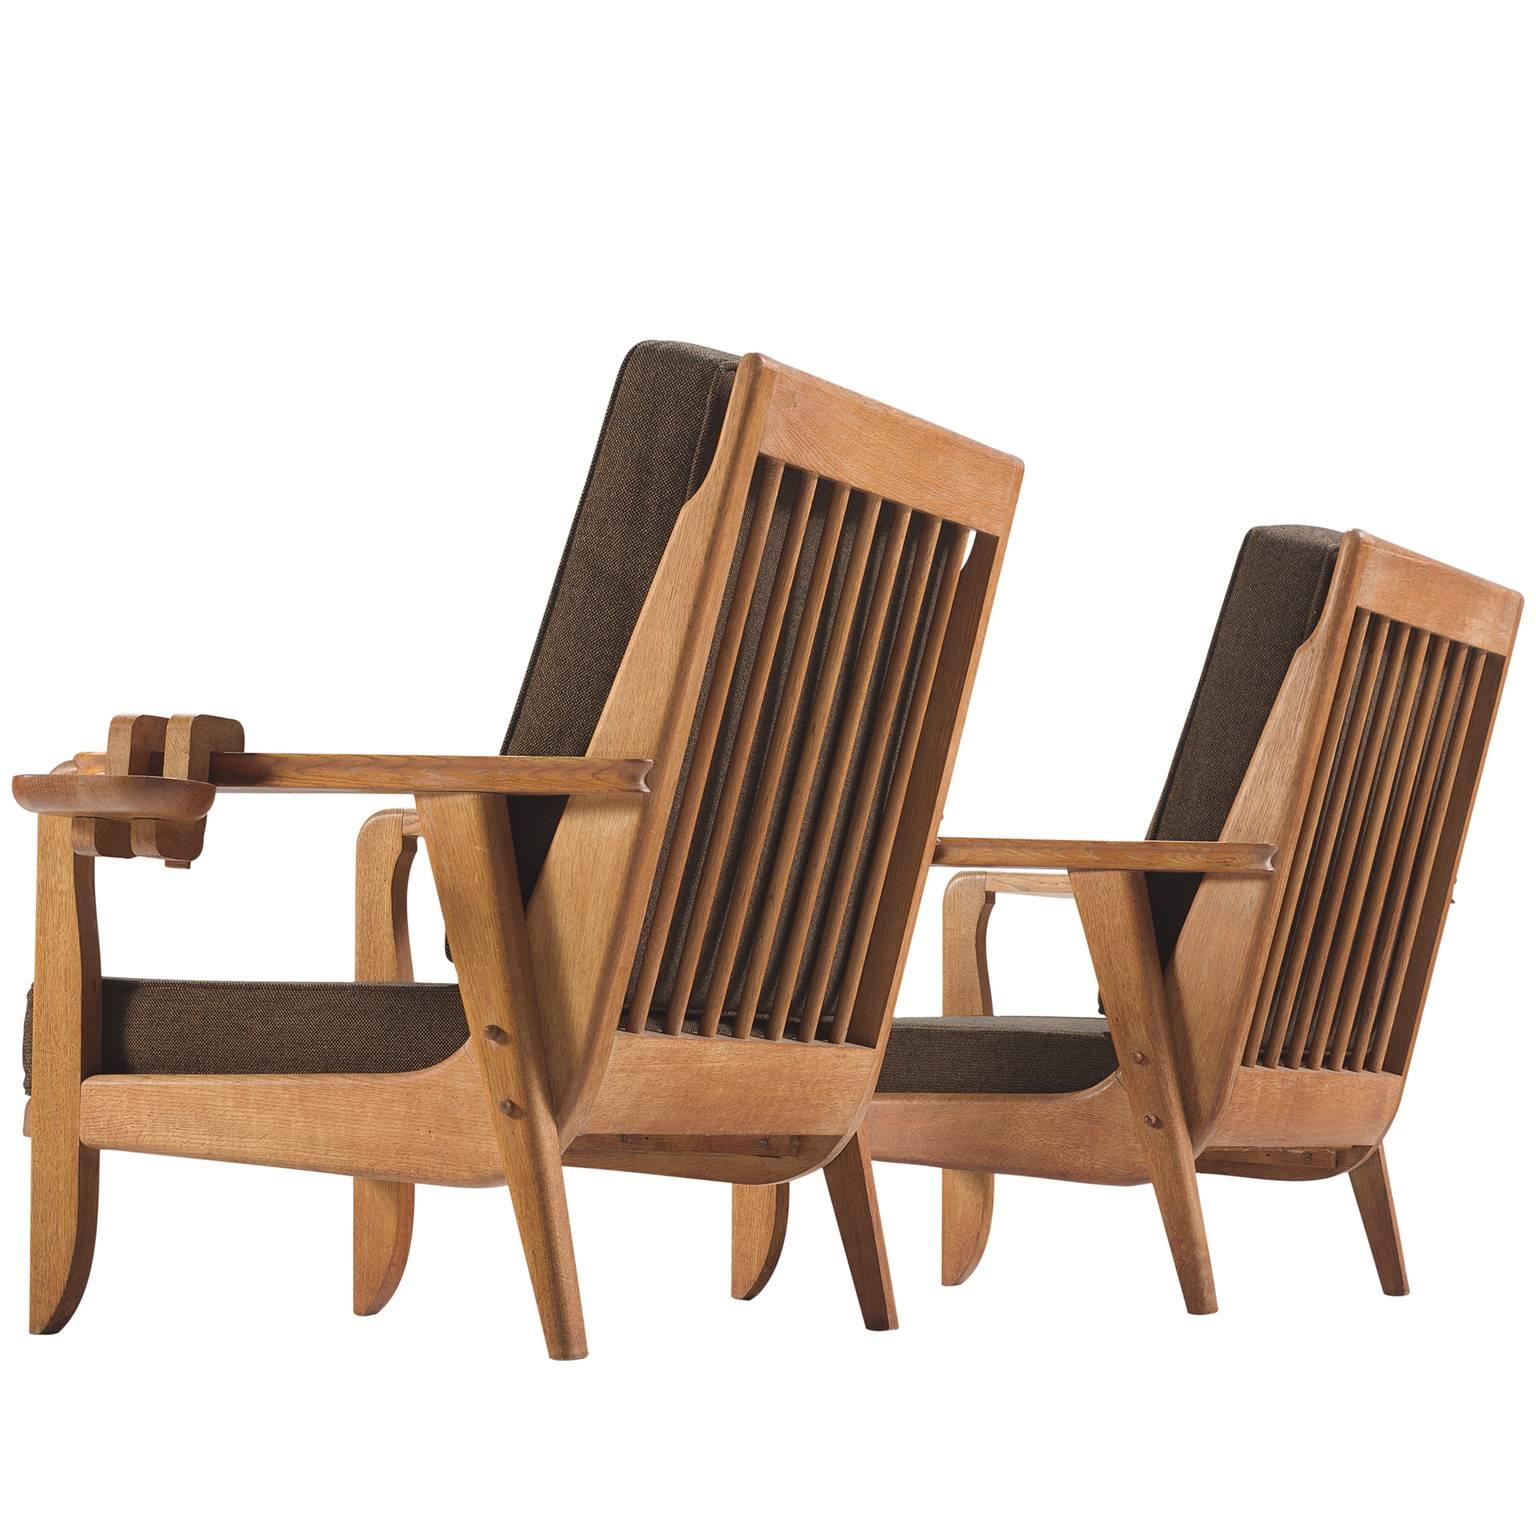 Chambron and Guillerme Solid Oak Lounge Chairs